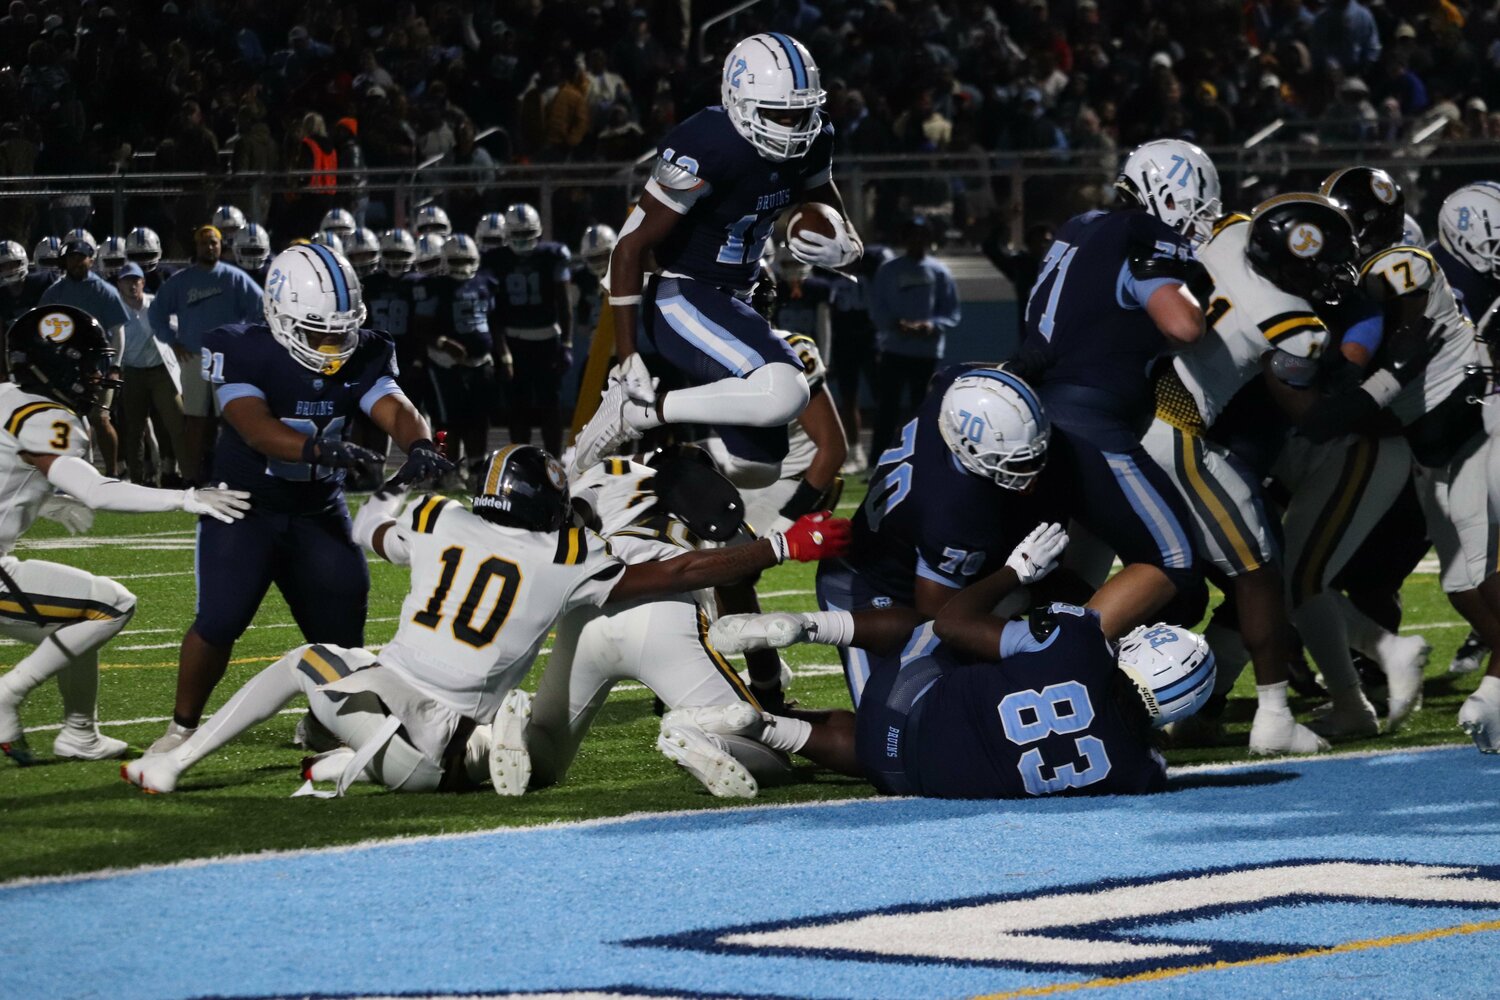 The Irmo football team fell short of winning its first state title since 1980, losing to South Florence in the 4A lower state championship.